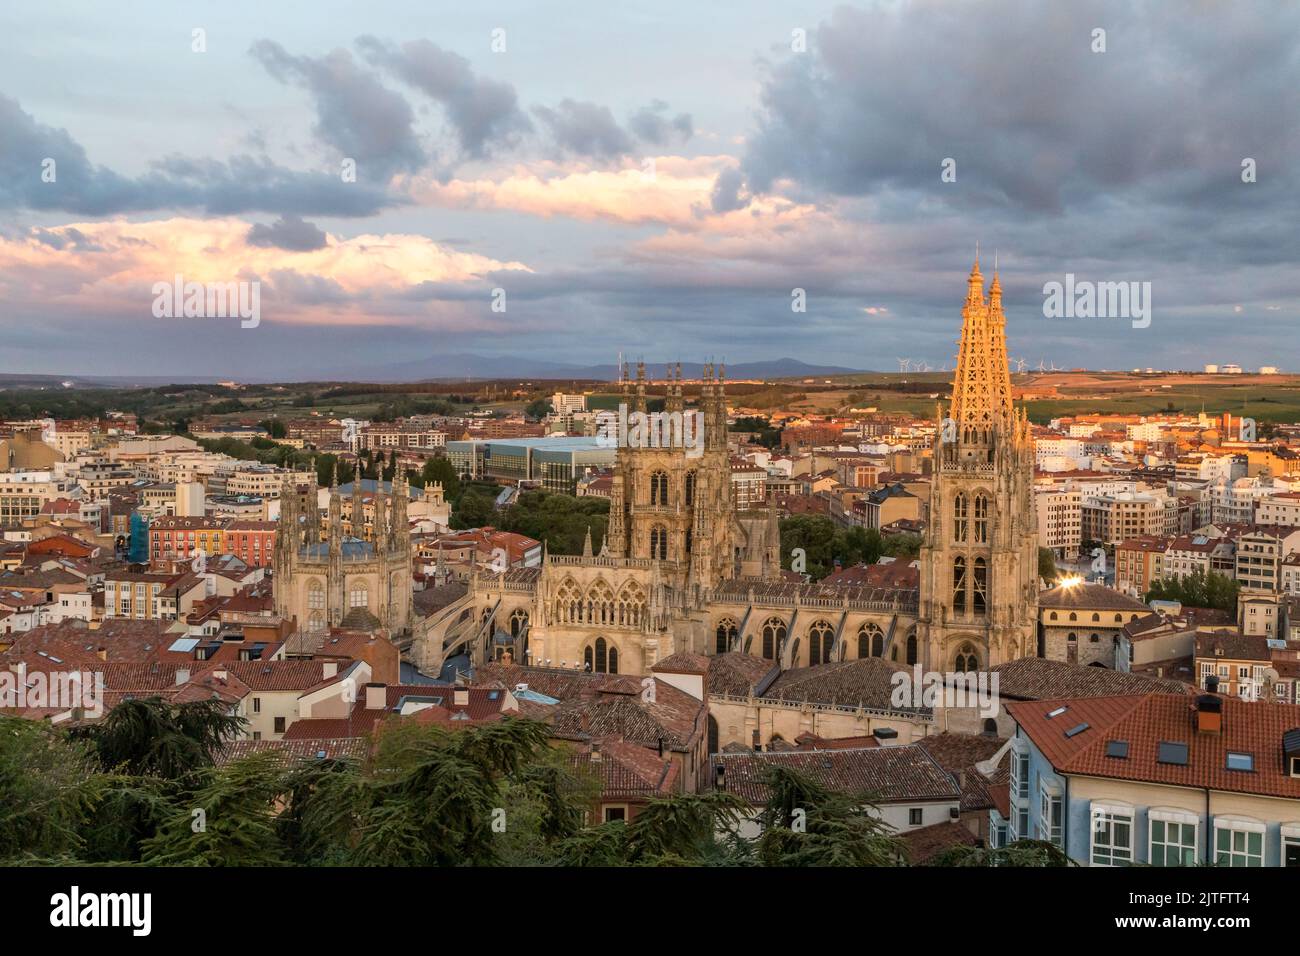 Burgos Spain, city landscape at sunset, with the Cathedral of Saint Mary of Burgos as the center of interest Stock Photo